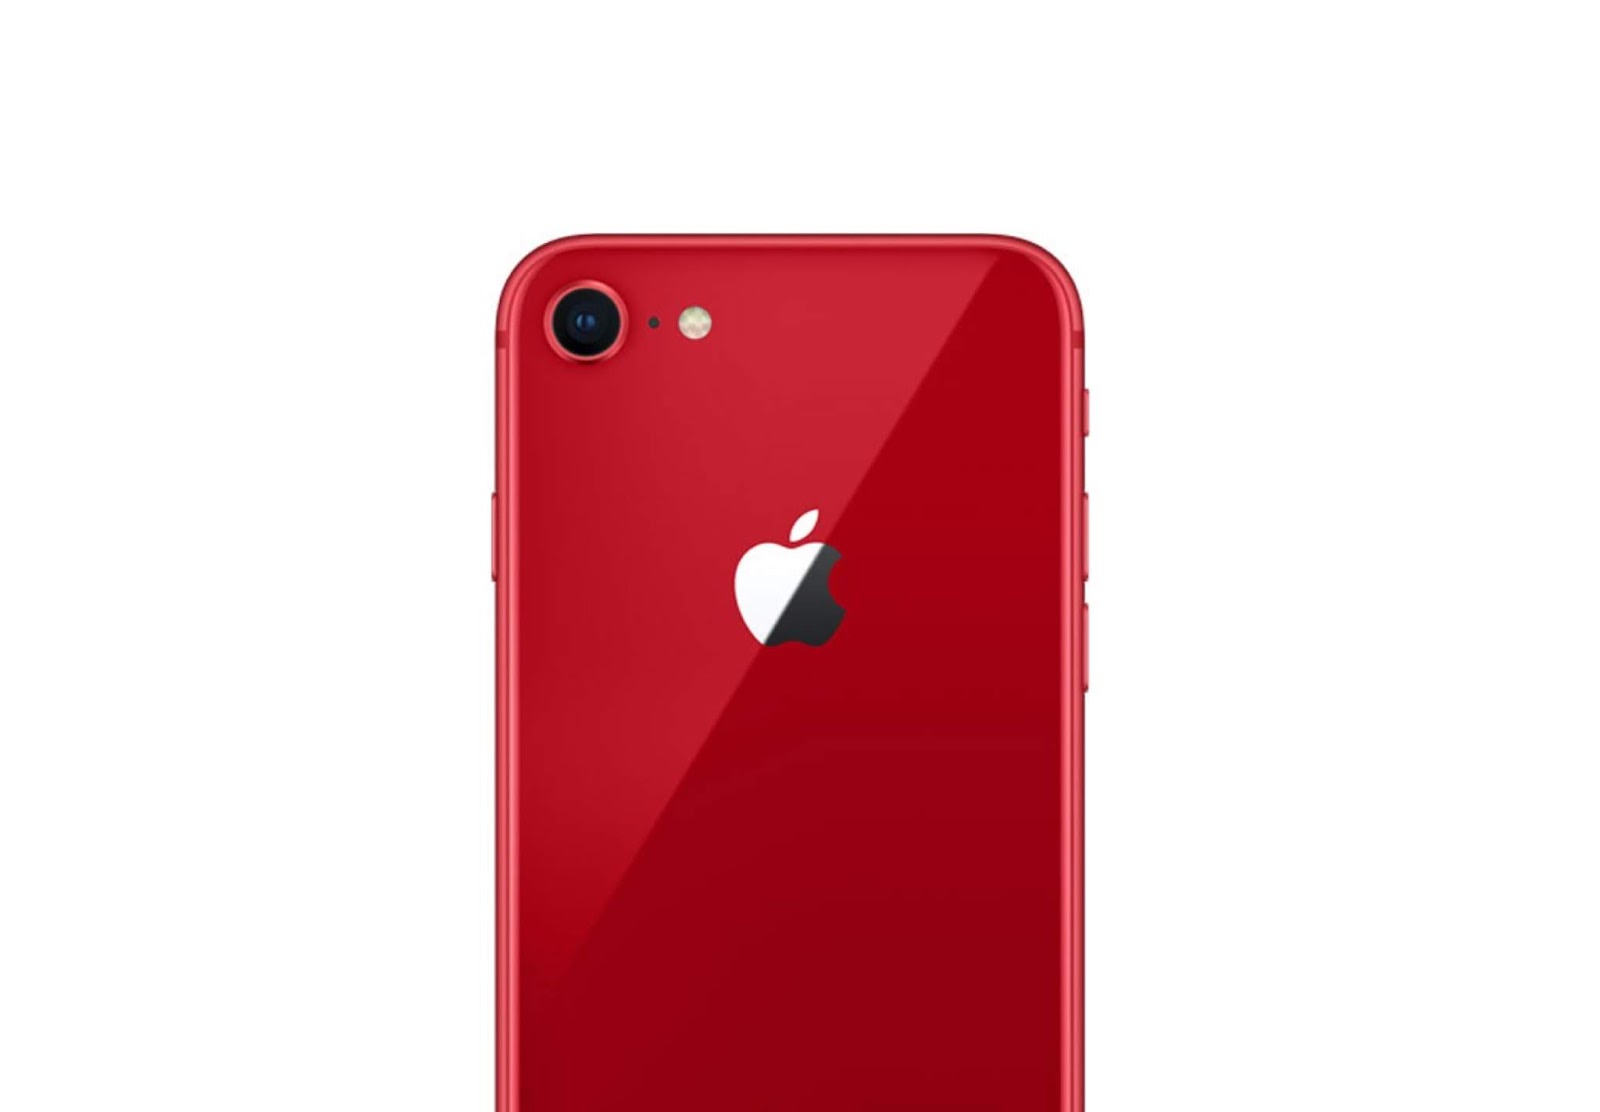 iPhone Images Appear with a 6.1-inch LCD Screen in Red, White and Blue